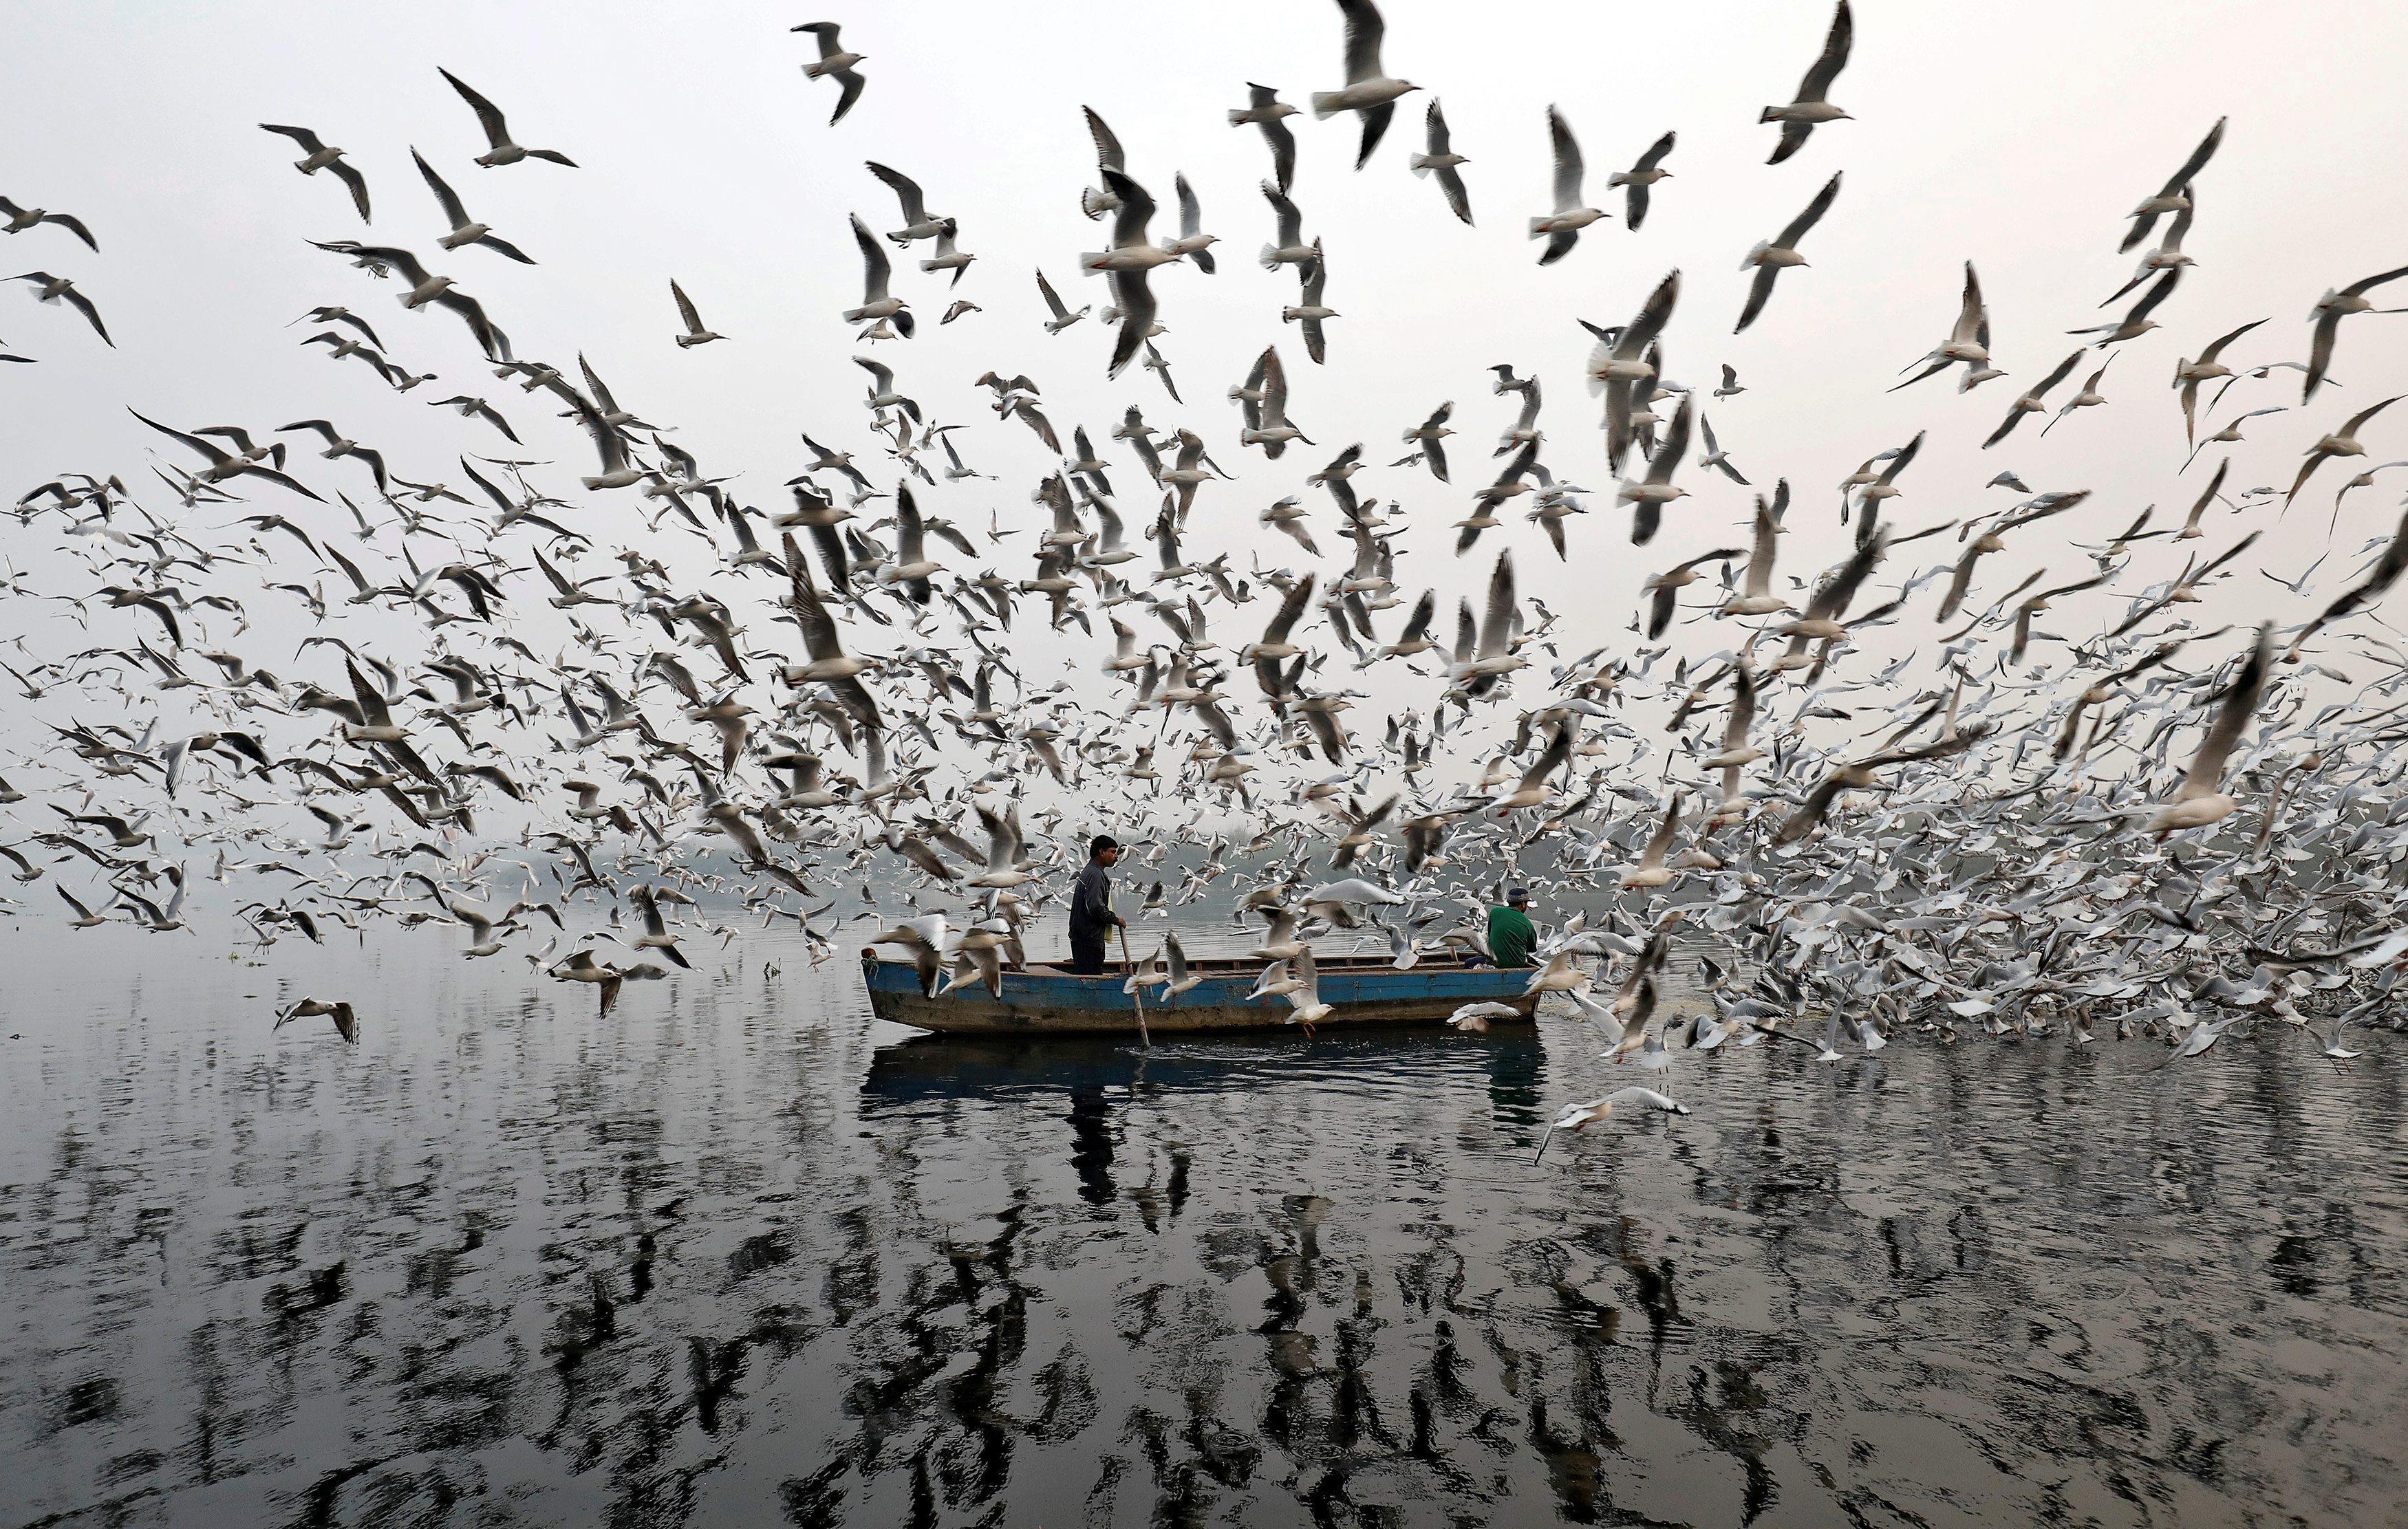 Men feed seagulls along the Yamuna river on a smoggy morning in New Delhi